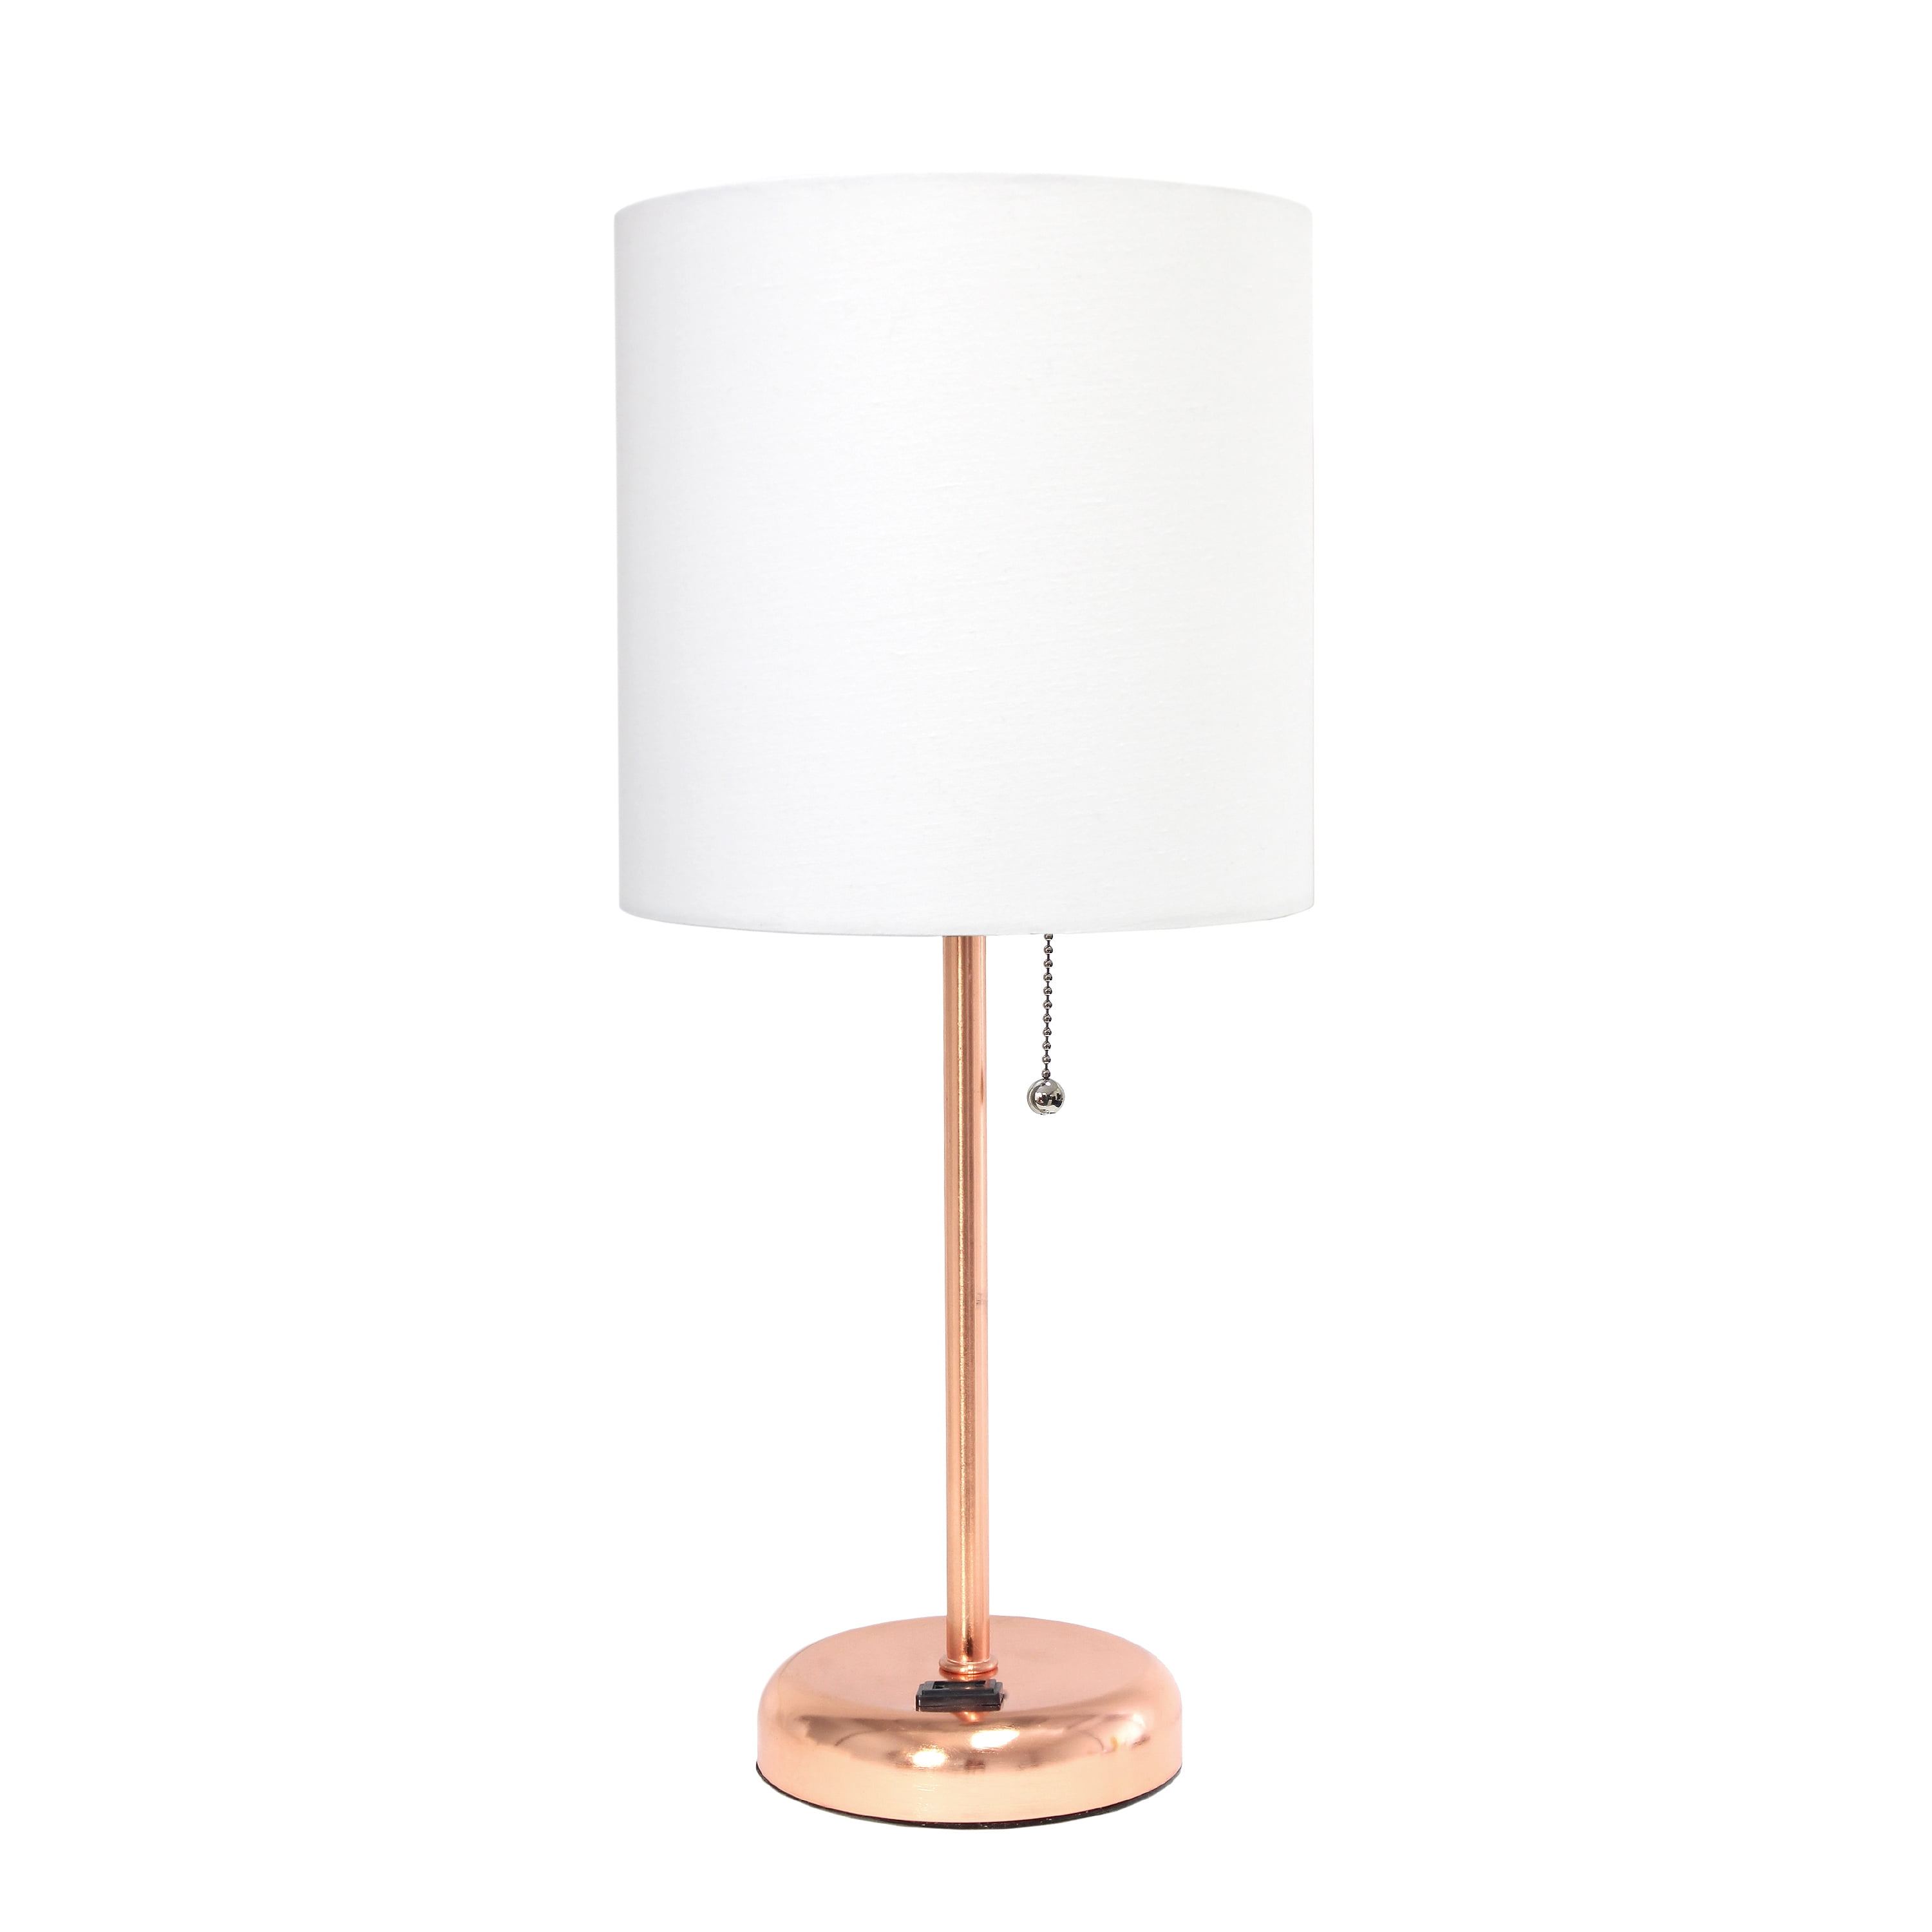 Lt2024-rgd Rose Gold Stick Table Lamp With Charging Outlet & Fabric Shade, White